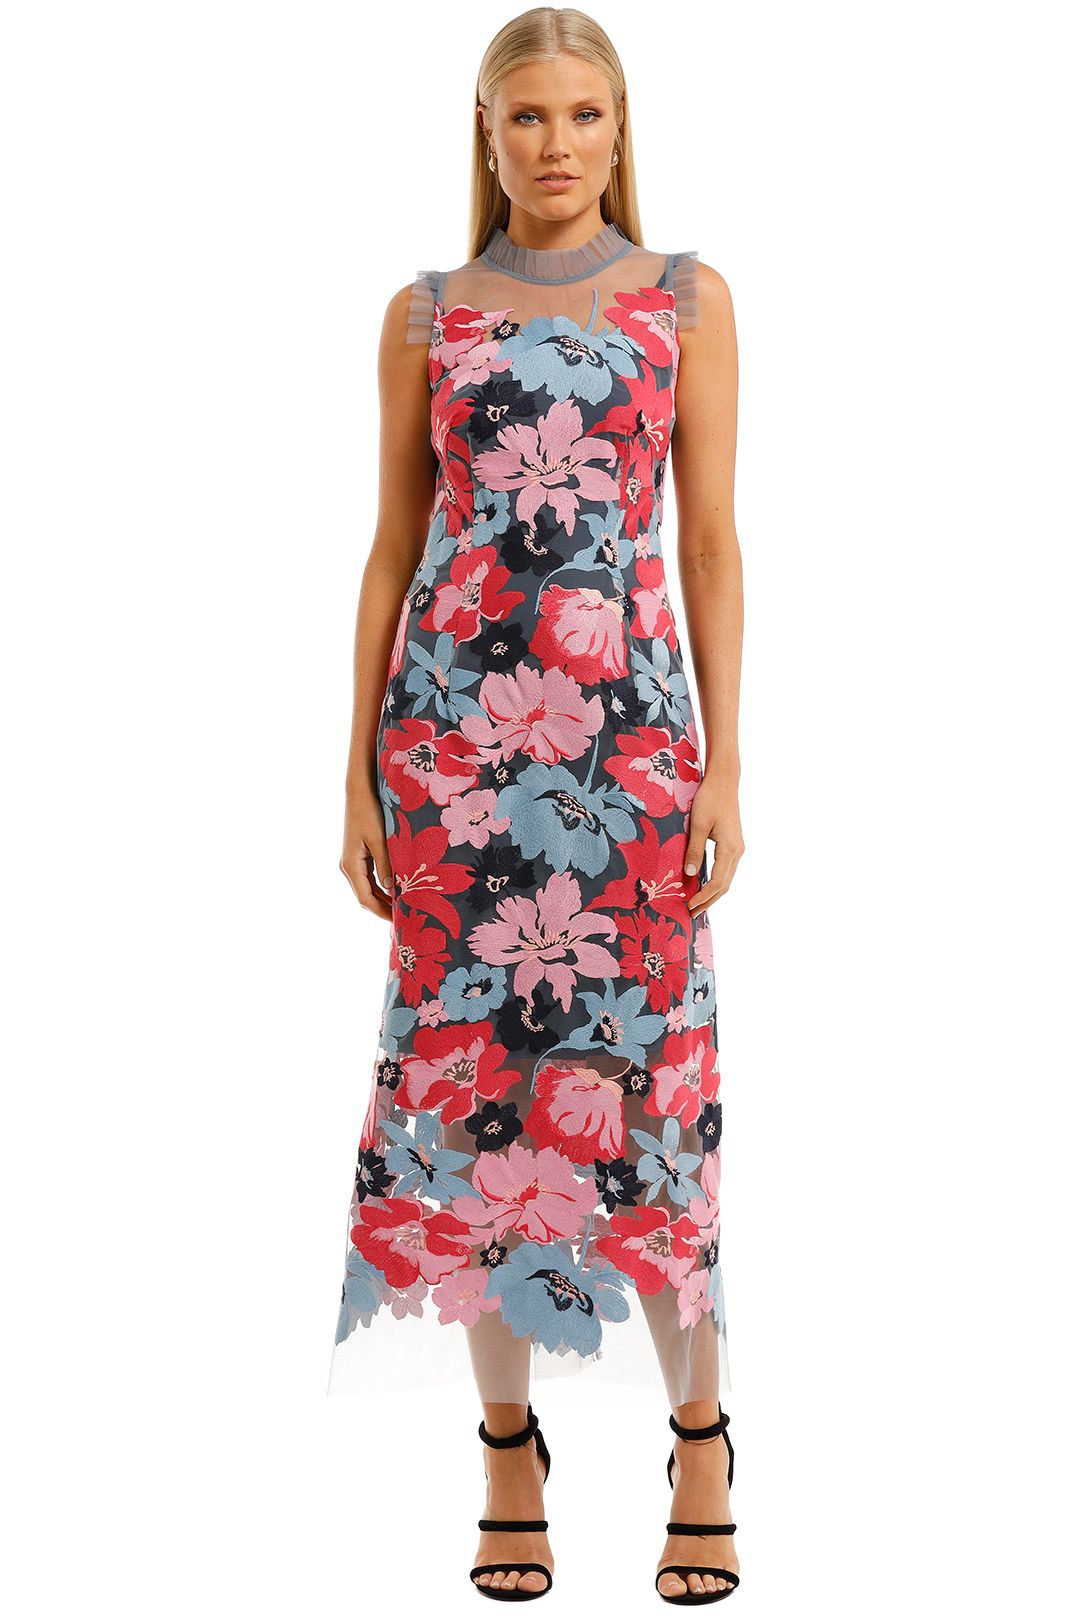 Moss-and-Spy-Bianca-Dress-Floral-Front